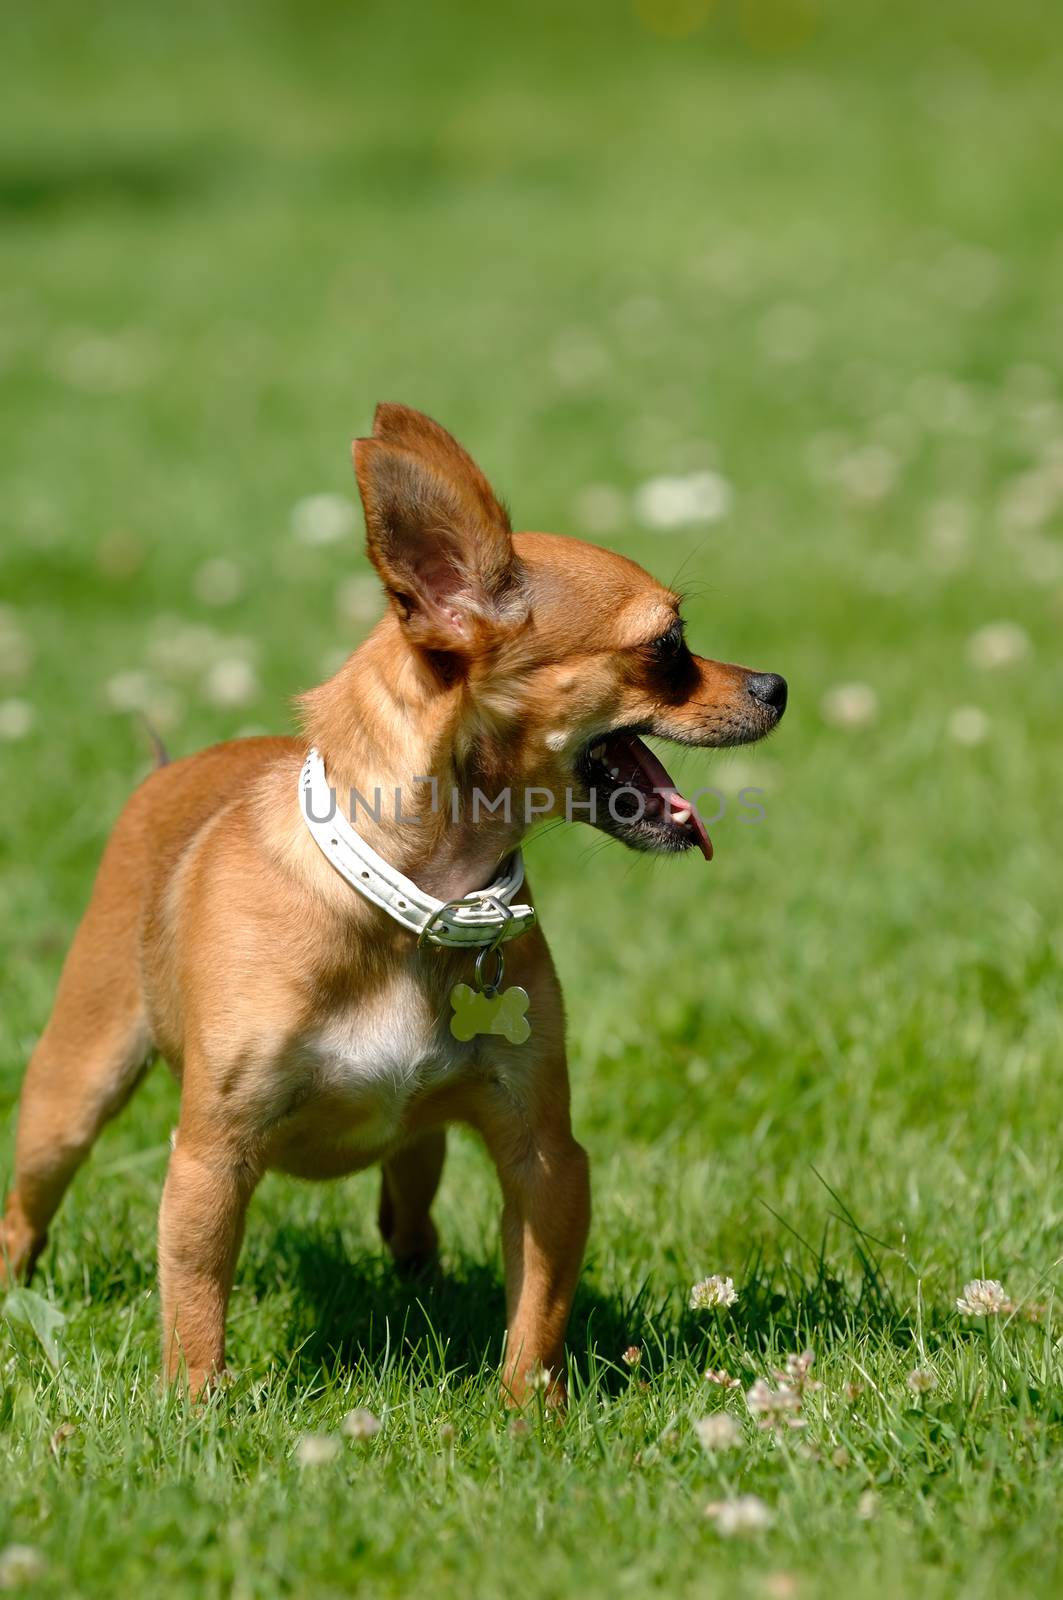 Chihuahua dog on green grass by cfoto